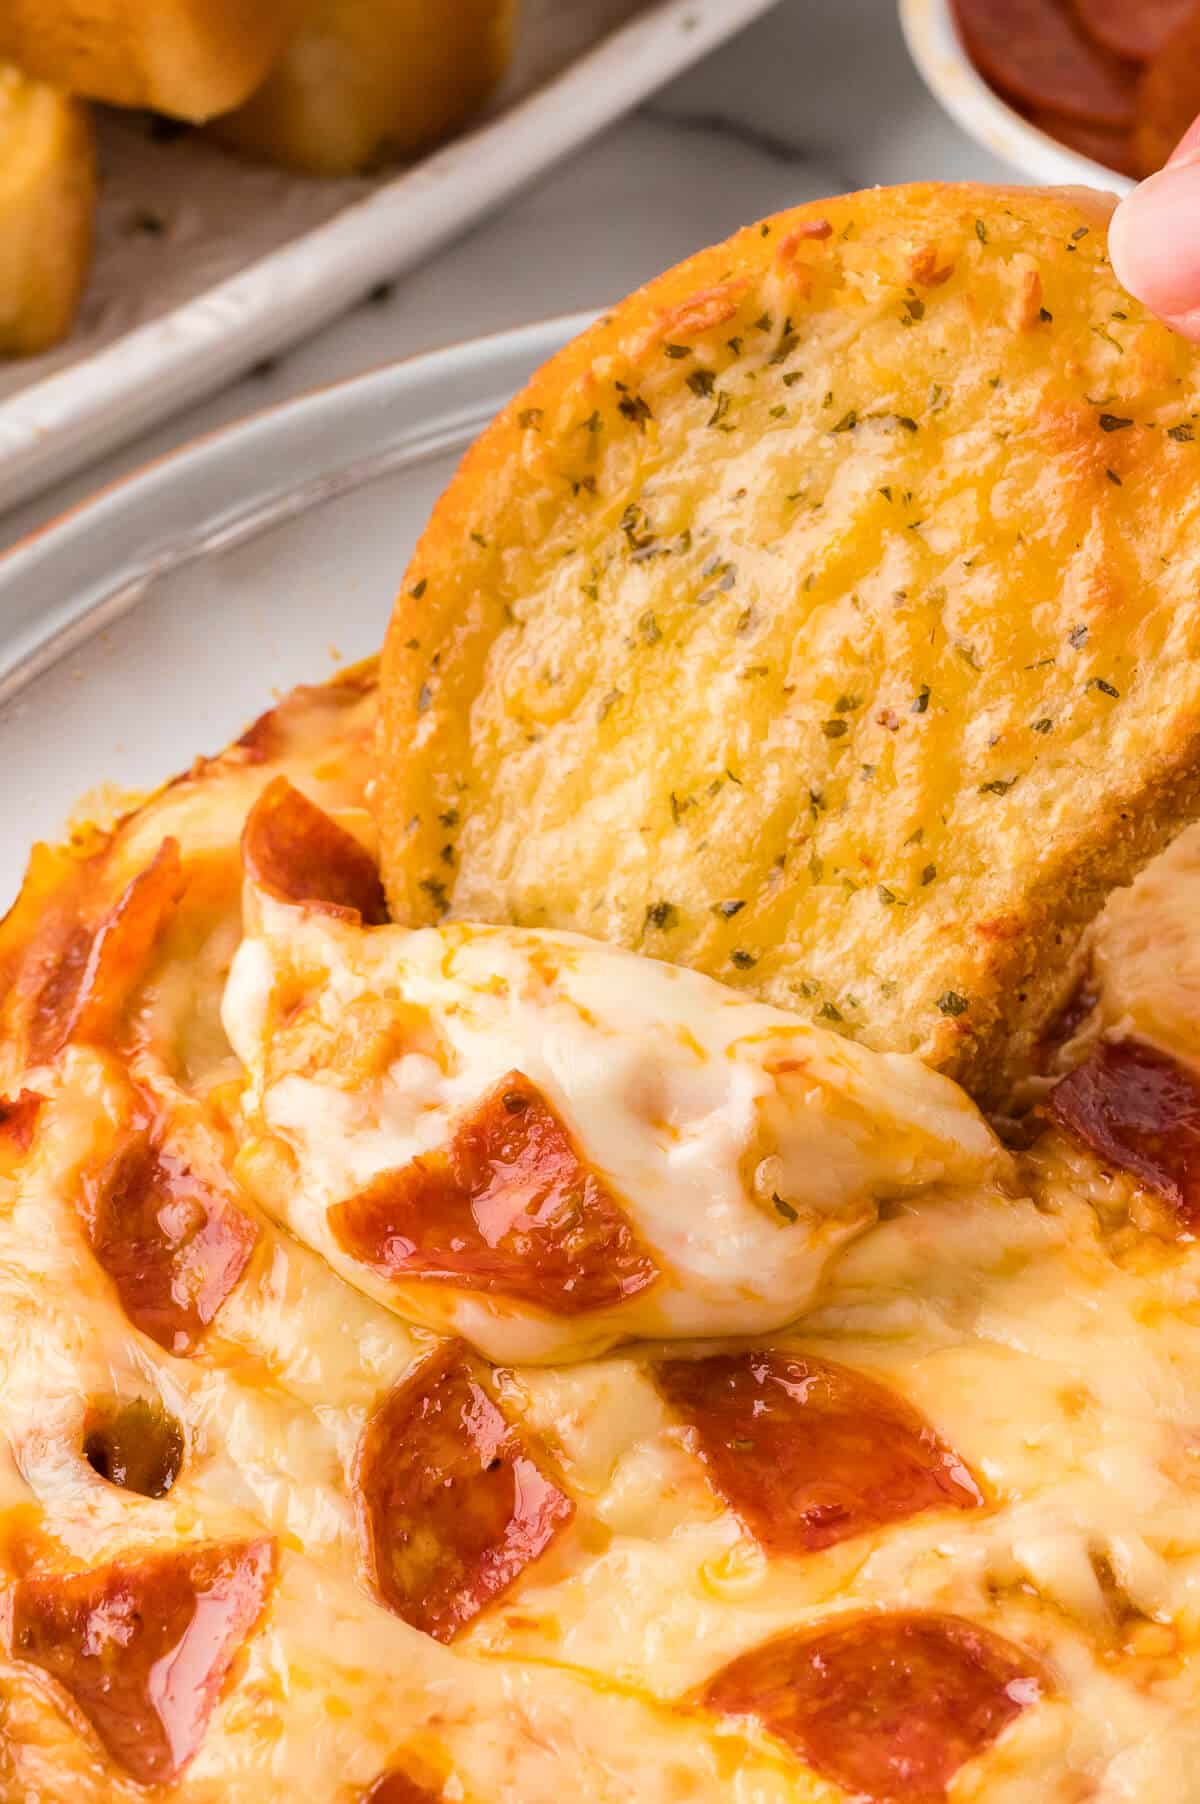 A hand dipping garlic bread in pizza dip.